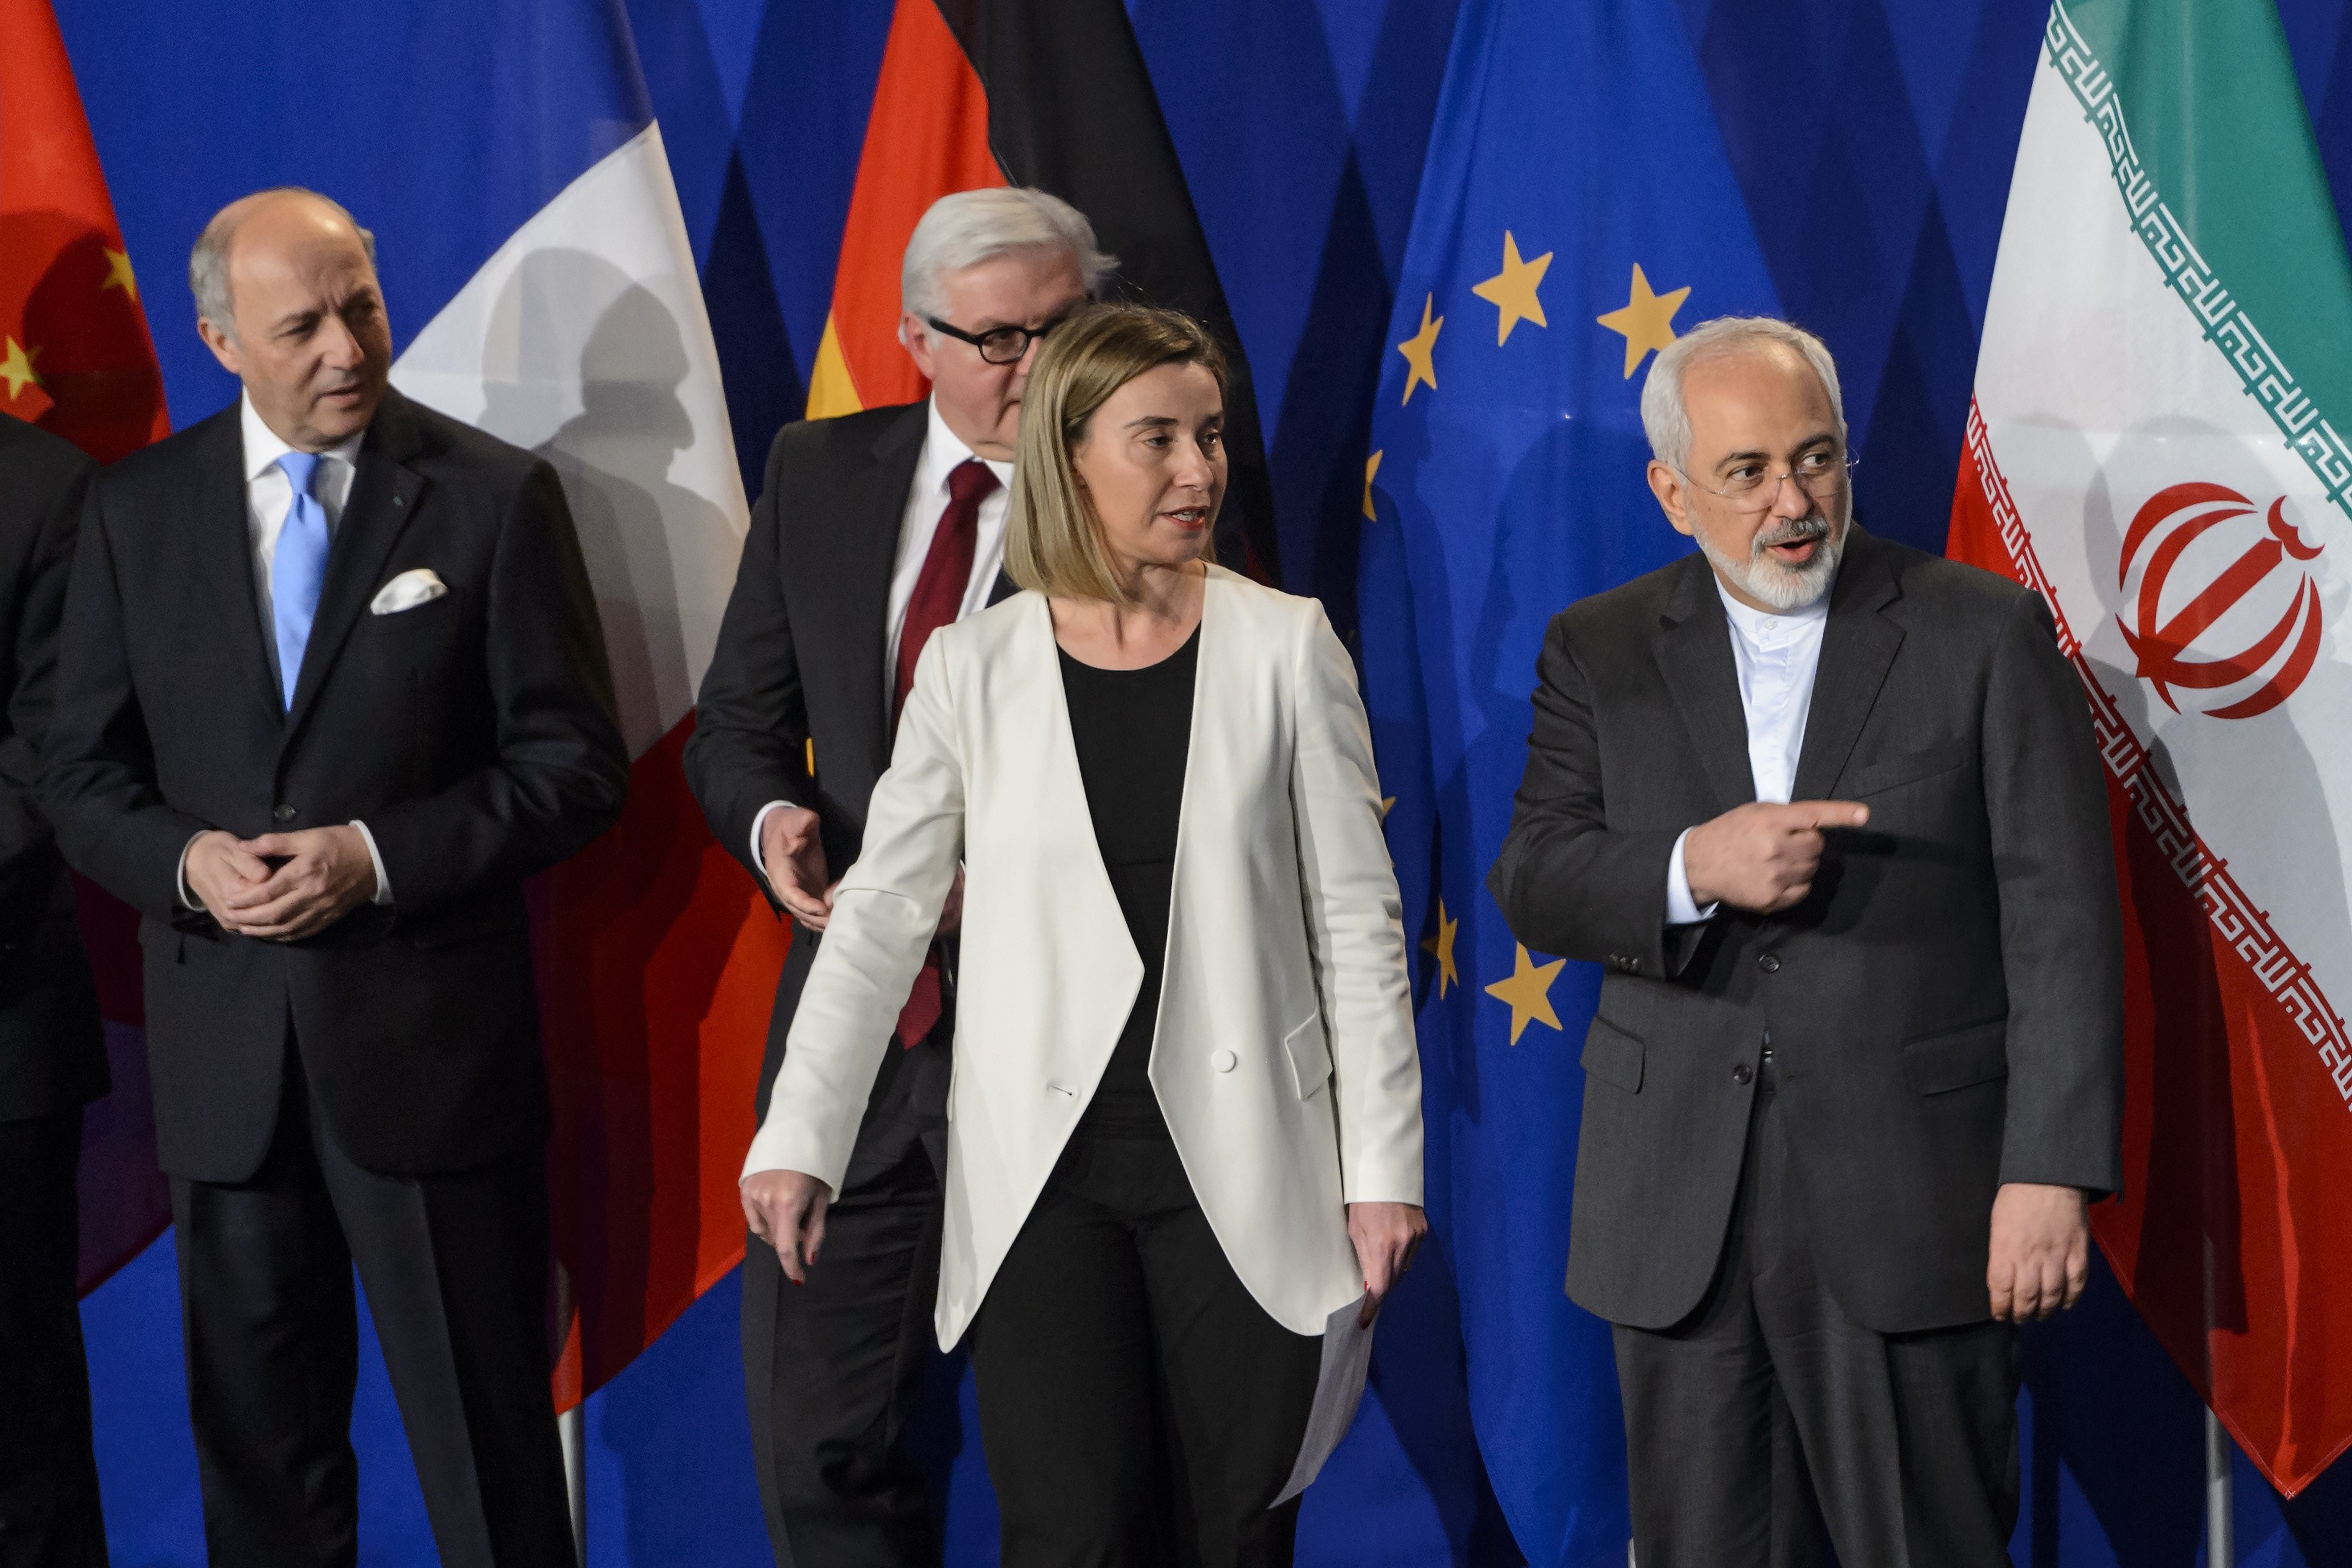 The EU's foreign policy chief Federica Mogherini, center, and Iranian Foreign Minister Javad Zarif, right.